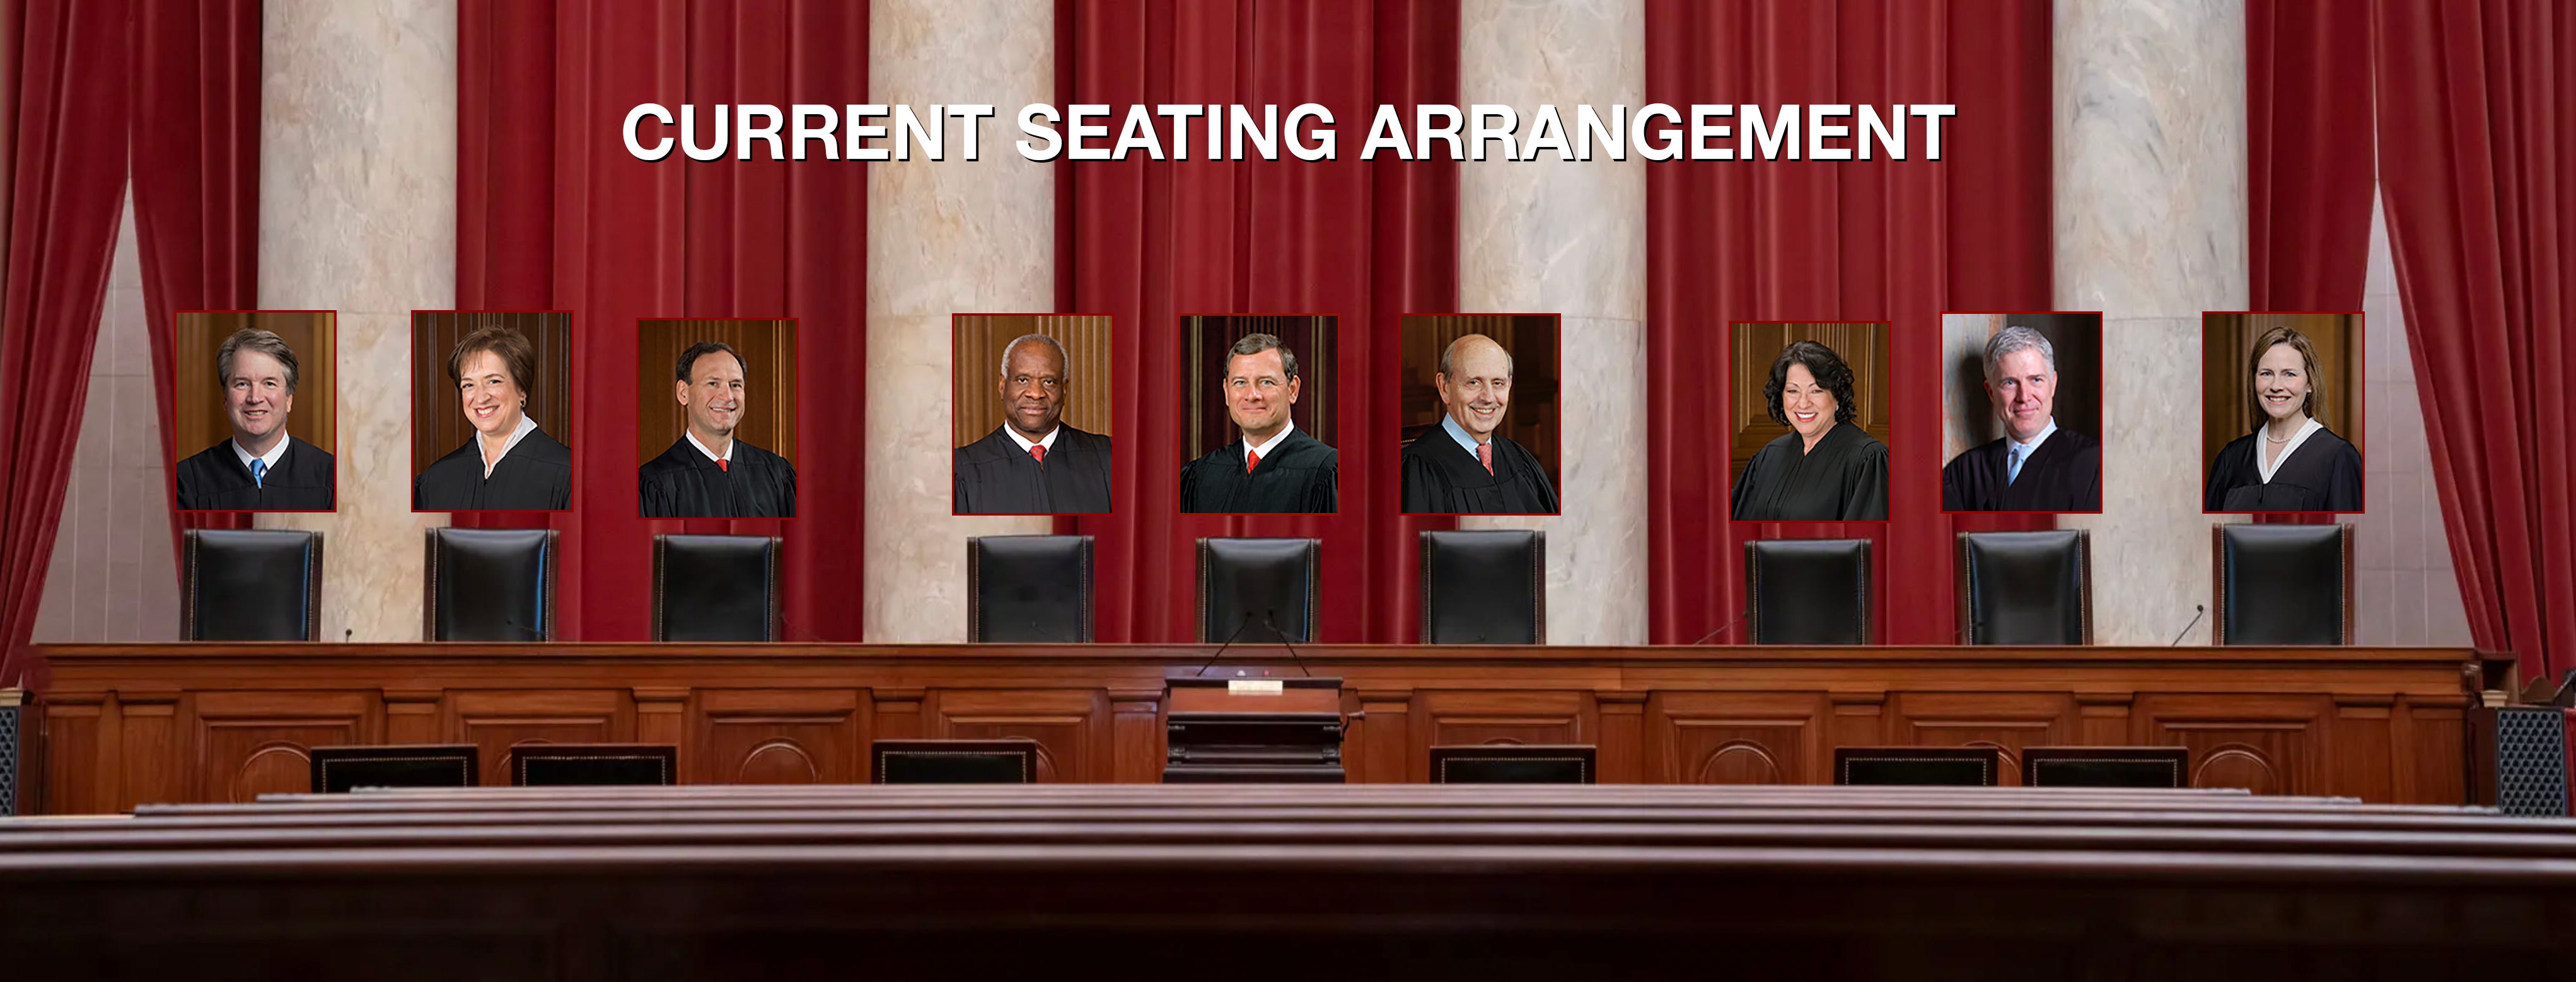 Musical Chairs: With a new Justice comes a new seating arrangement at